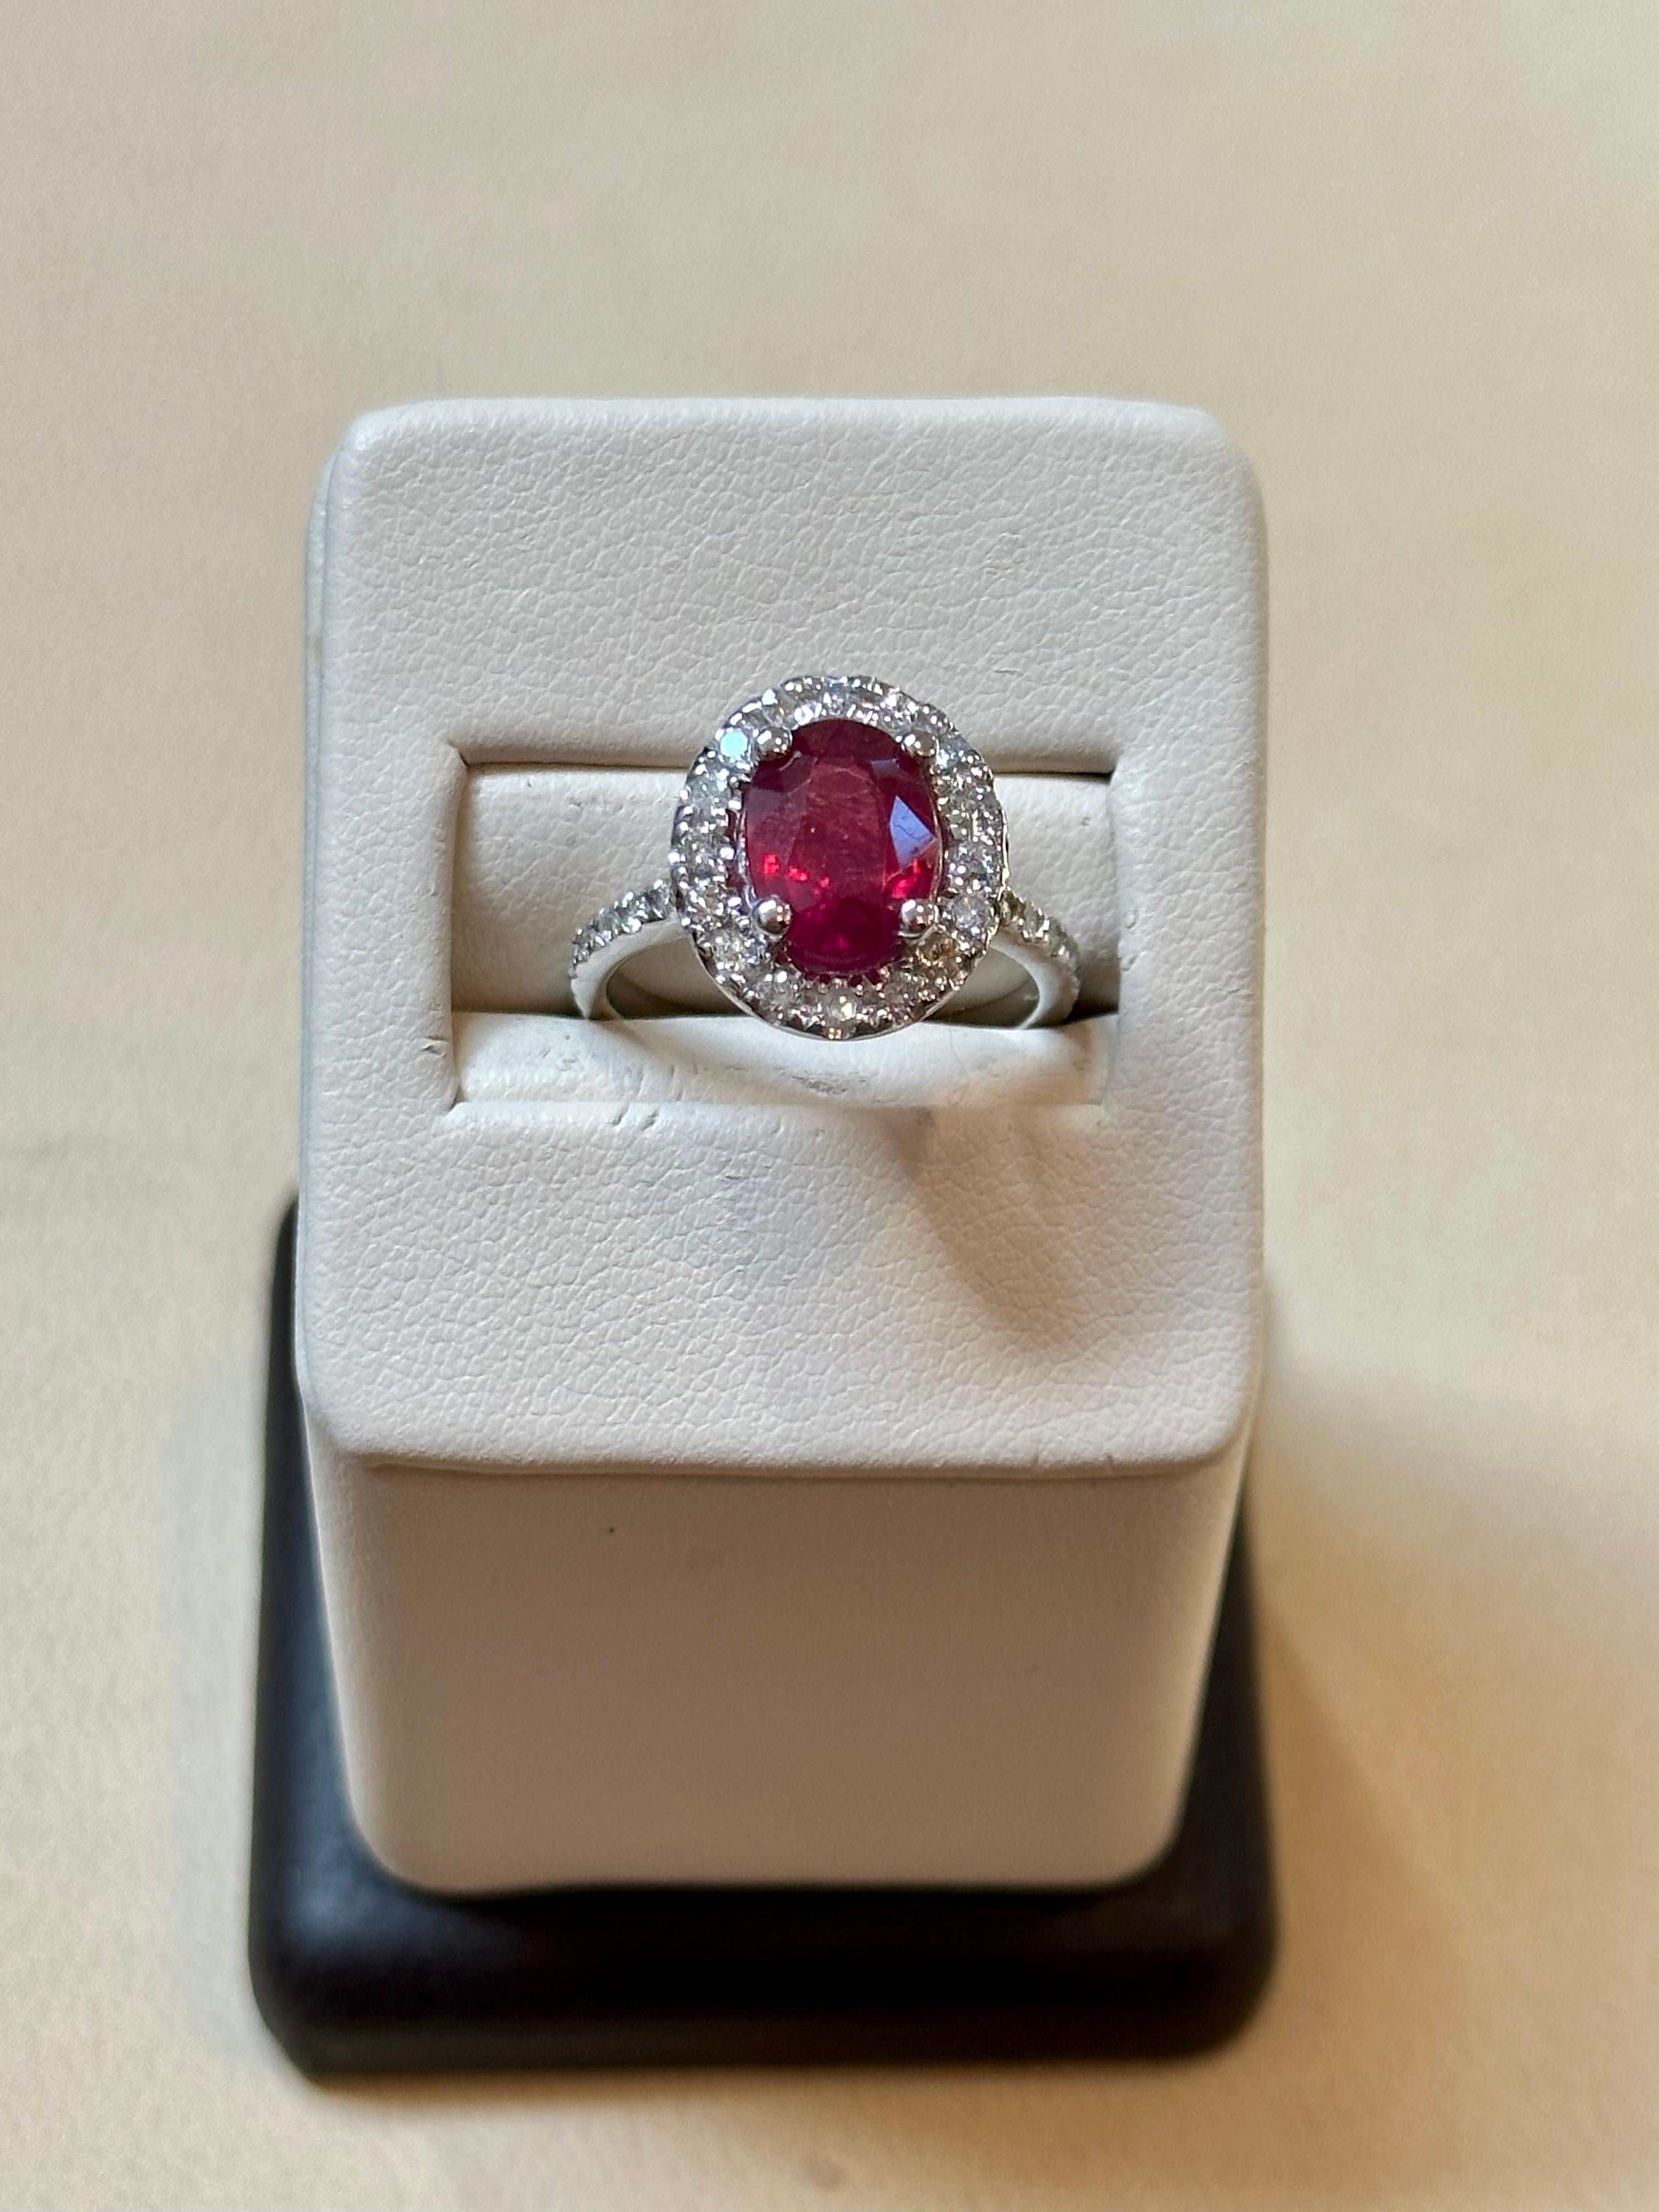 3 Carat Oval Treated Ruby & 1.25 ct Diamond Ring 14 Karat White Gold Size 6 For Sale 5